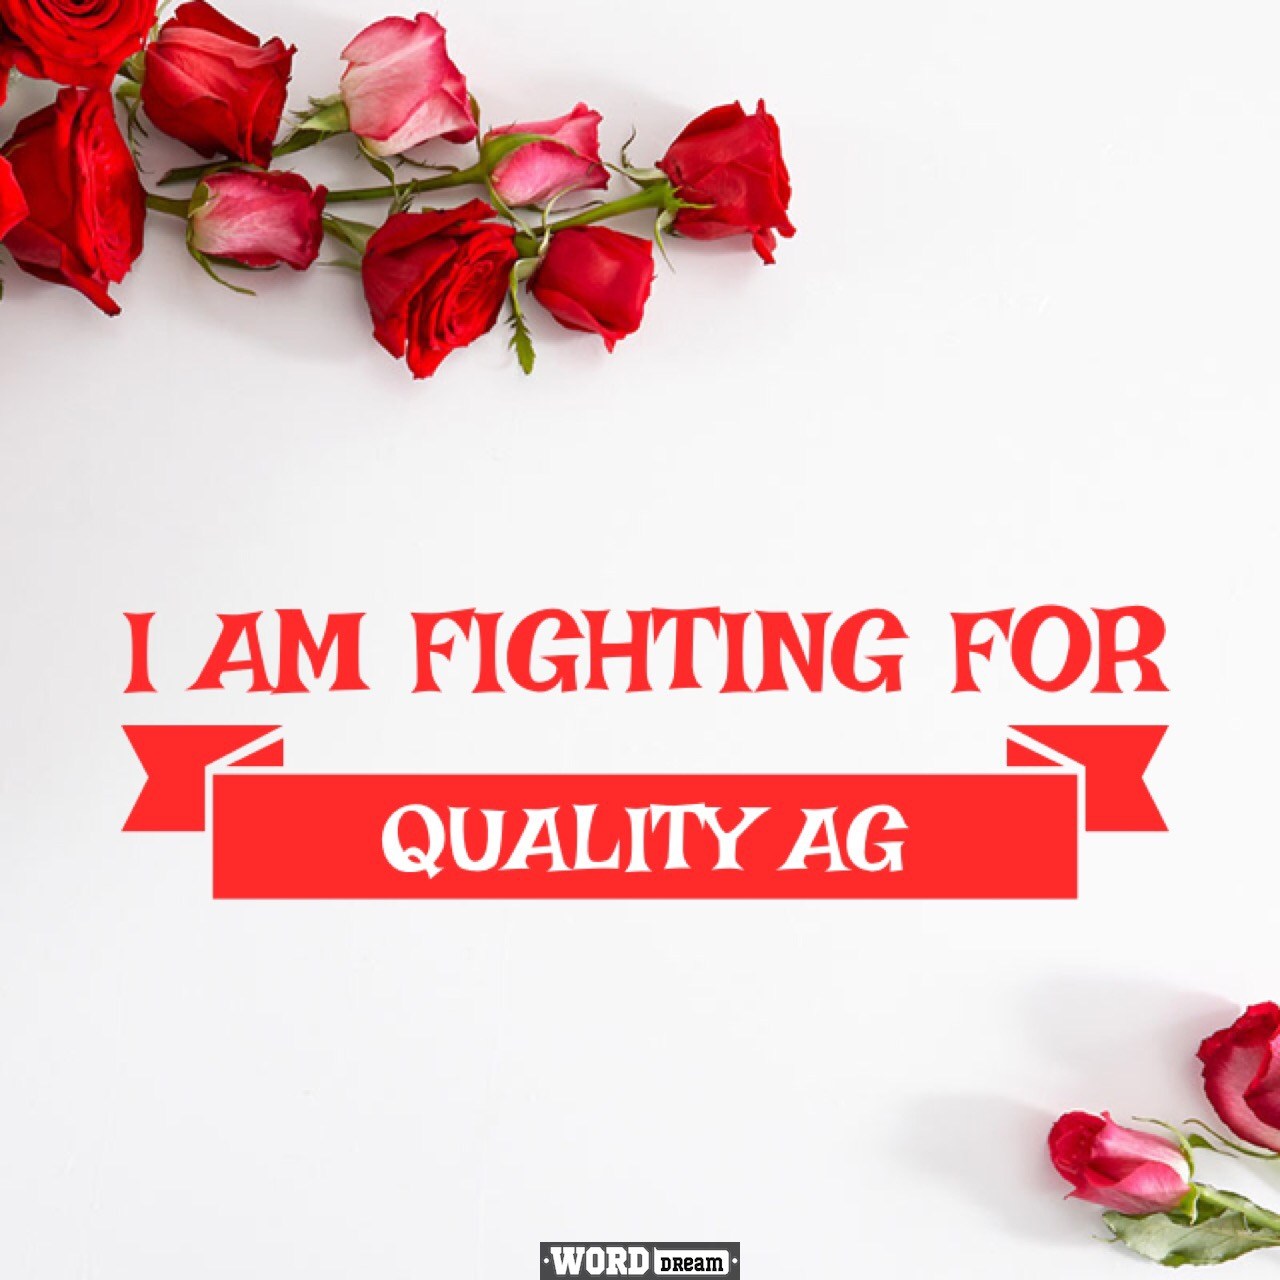 I am Fighting for Quality AG!